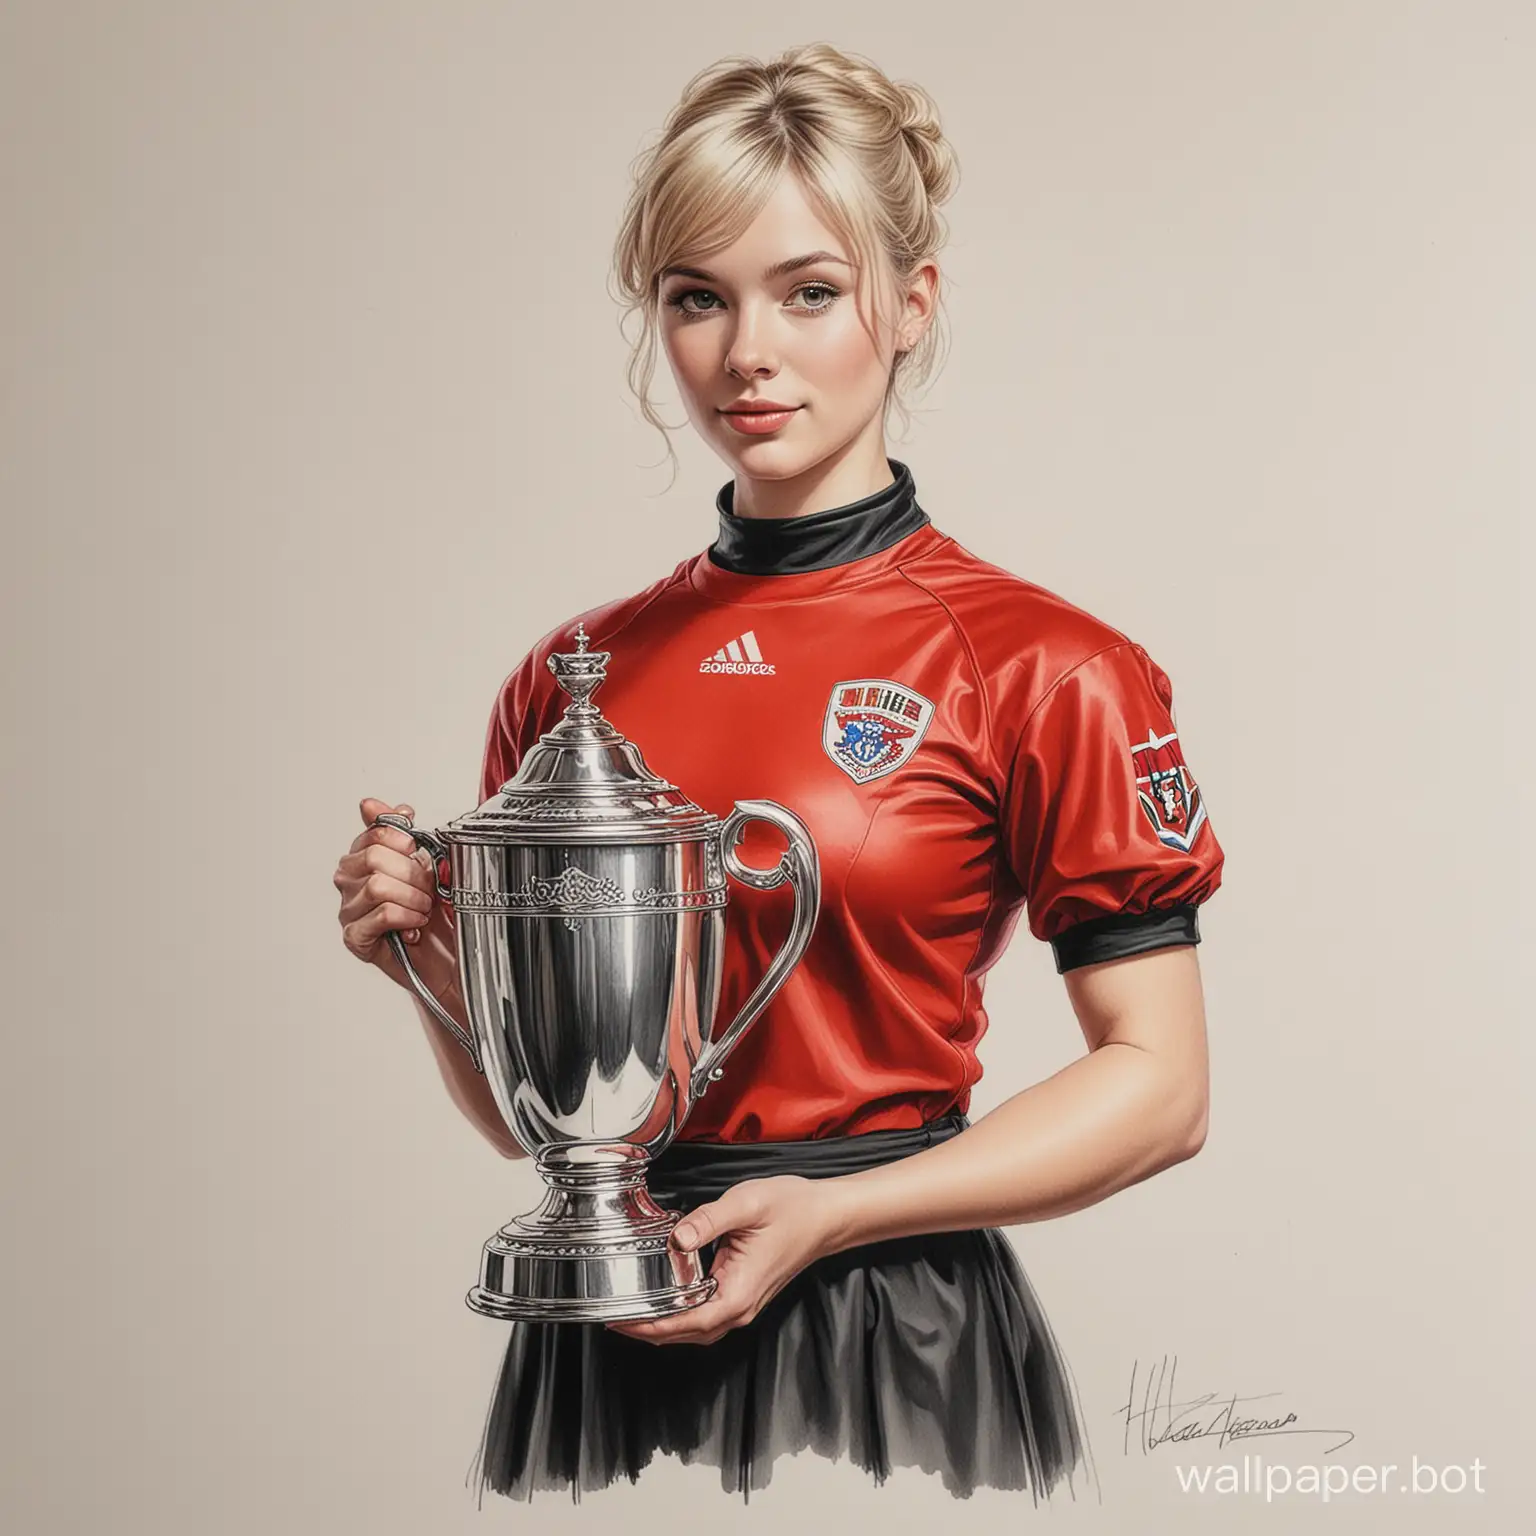 Young-Woman-in-Red-and-Black-Football-Uniform-Holding-Champions-Cup